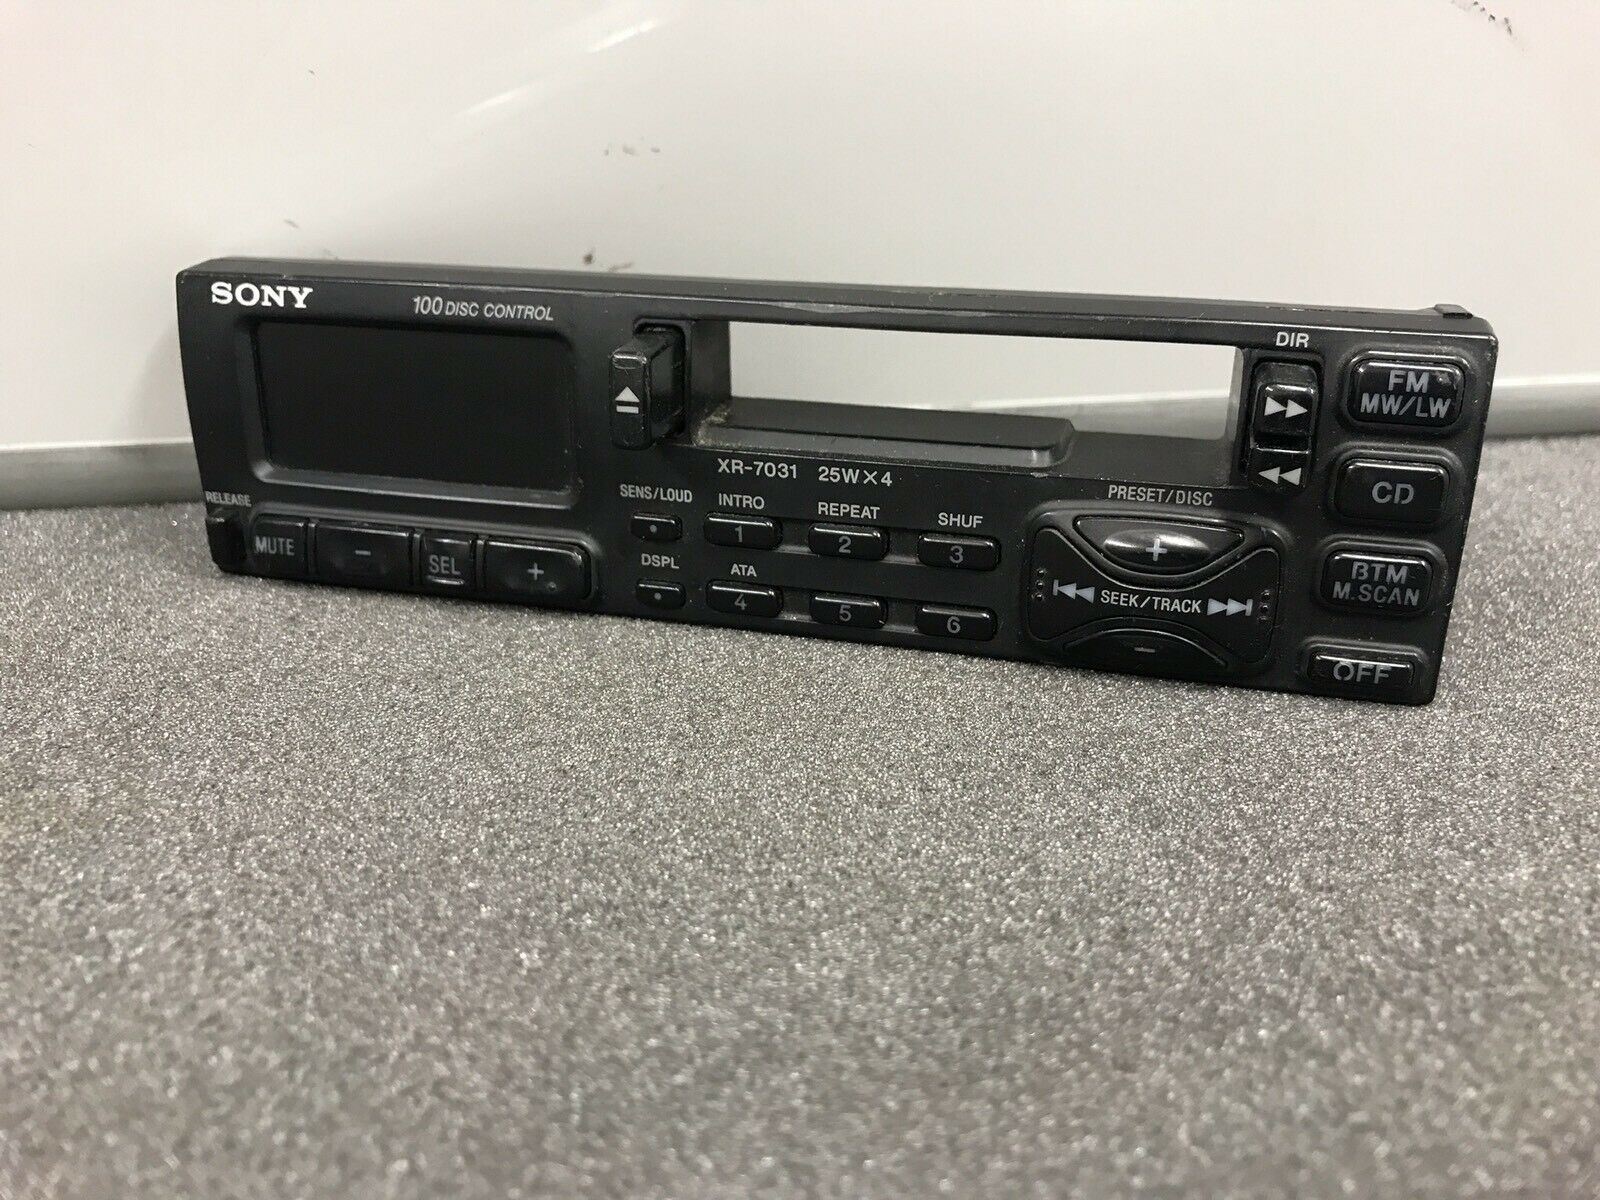 Sony Xr-7031 Car Radio Stereo Cassette Player Face Front Panel complete Xr7031